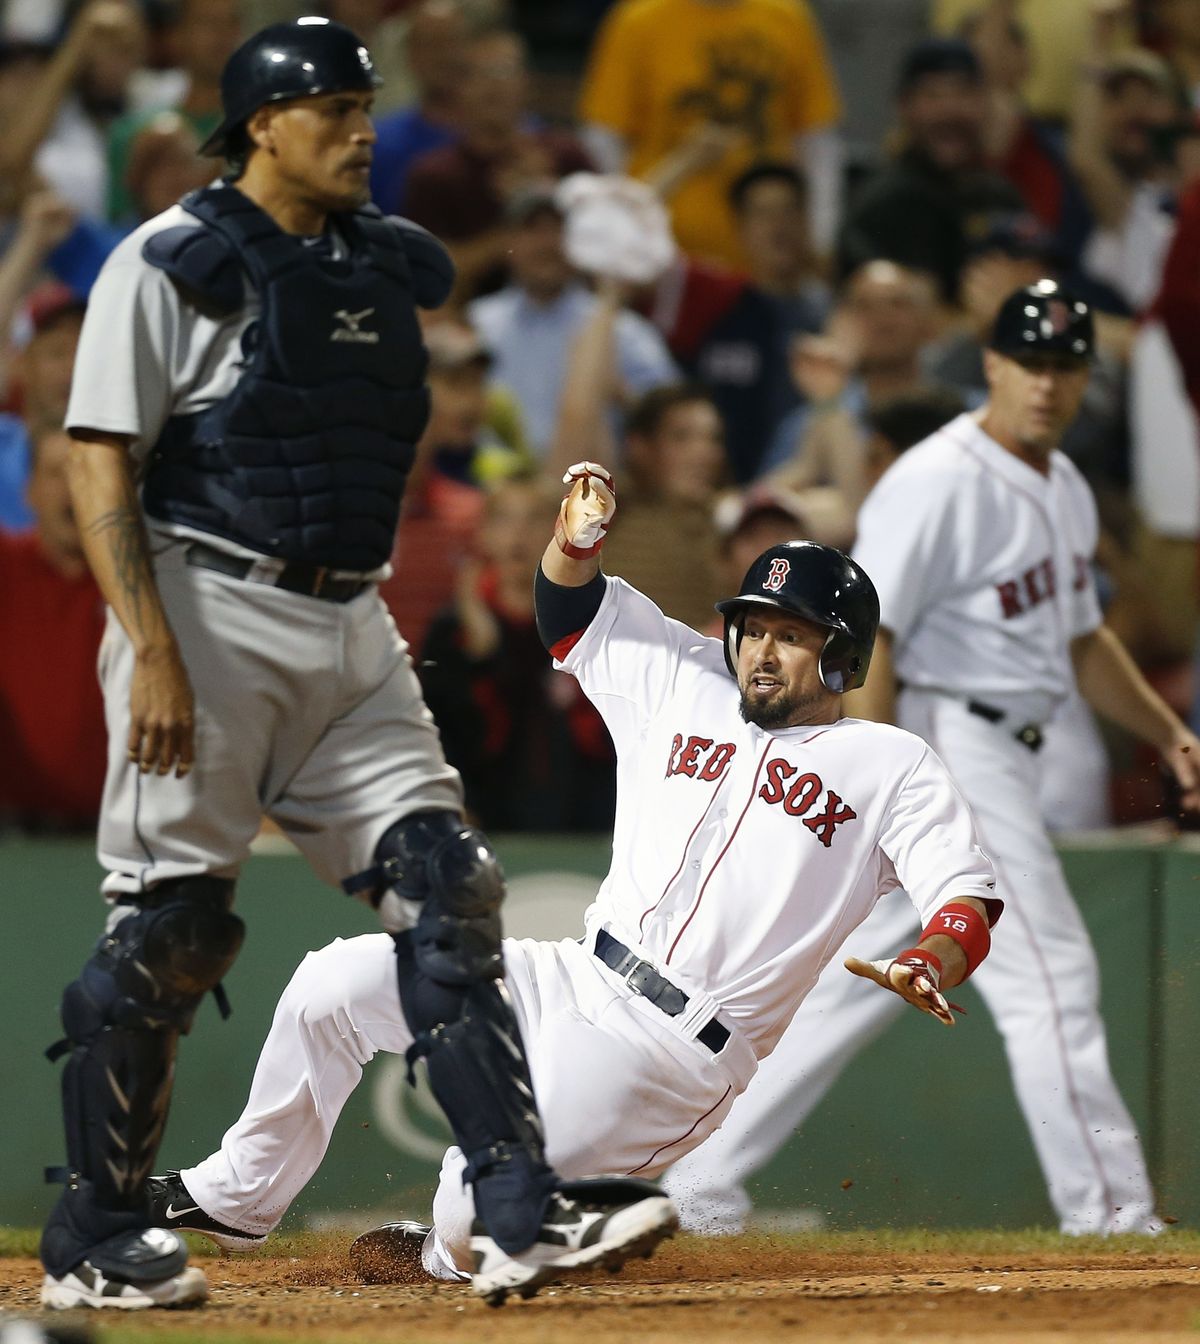 Boston Shane Victorino slides home with the tying run in the ninth inning. (Associated Press)